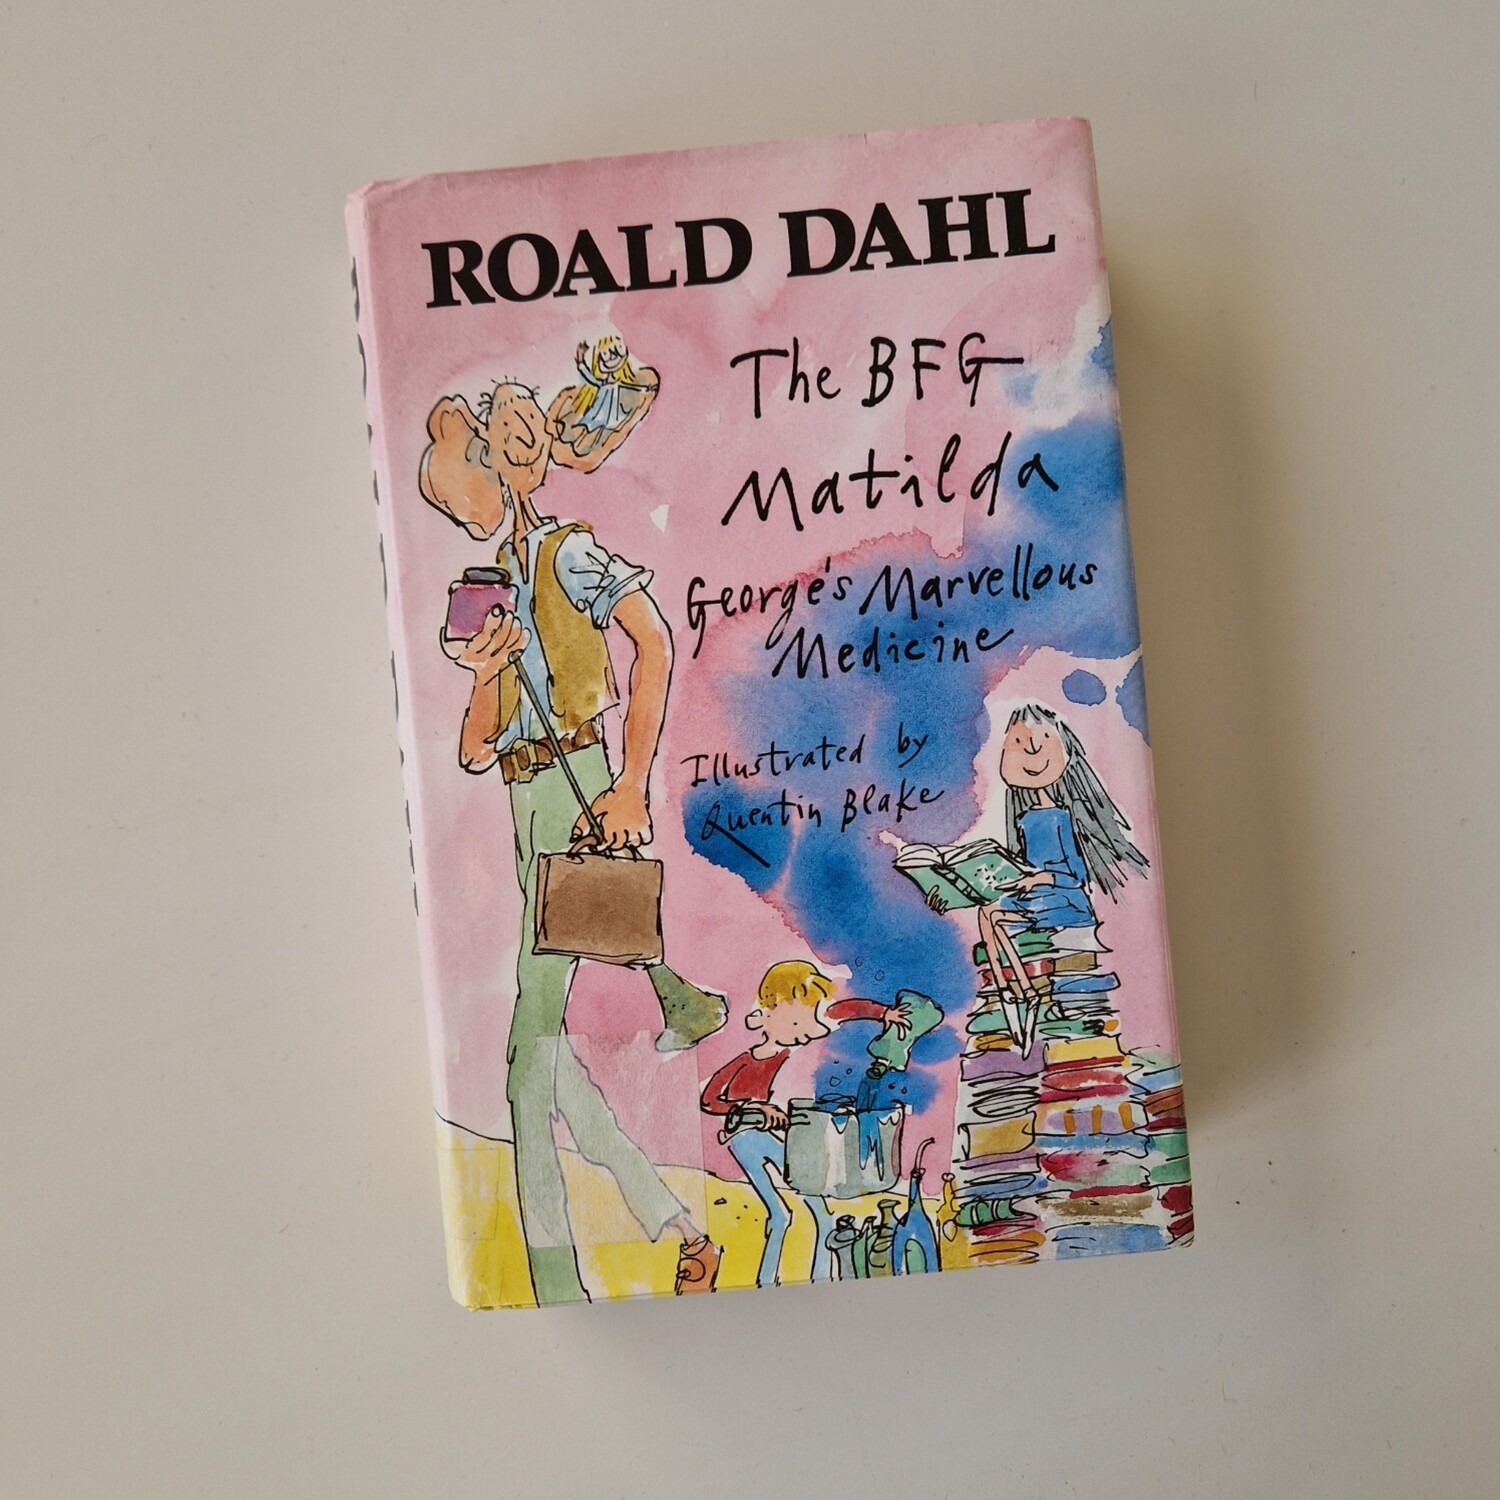 Roald Dahl - BFG, Matilda and George's Marvellous Medicine Notebook - made from a Dust Jacket